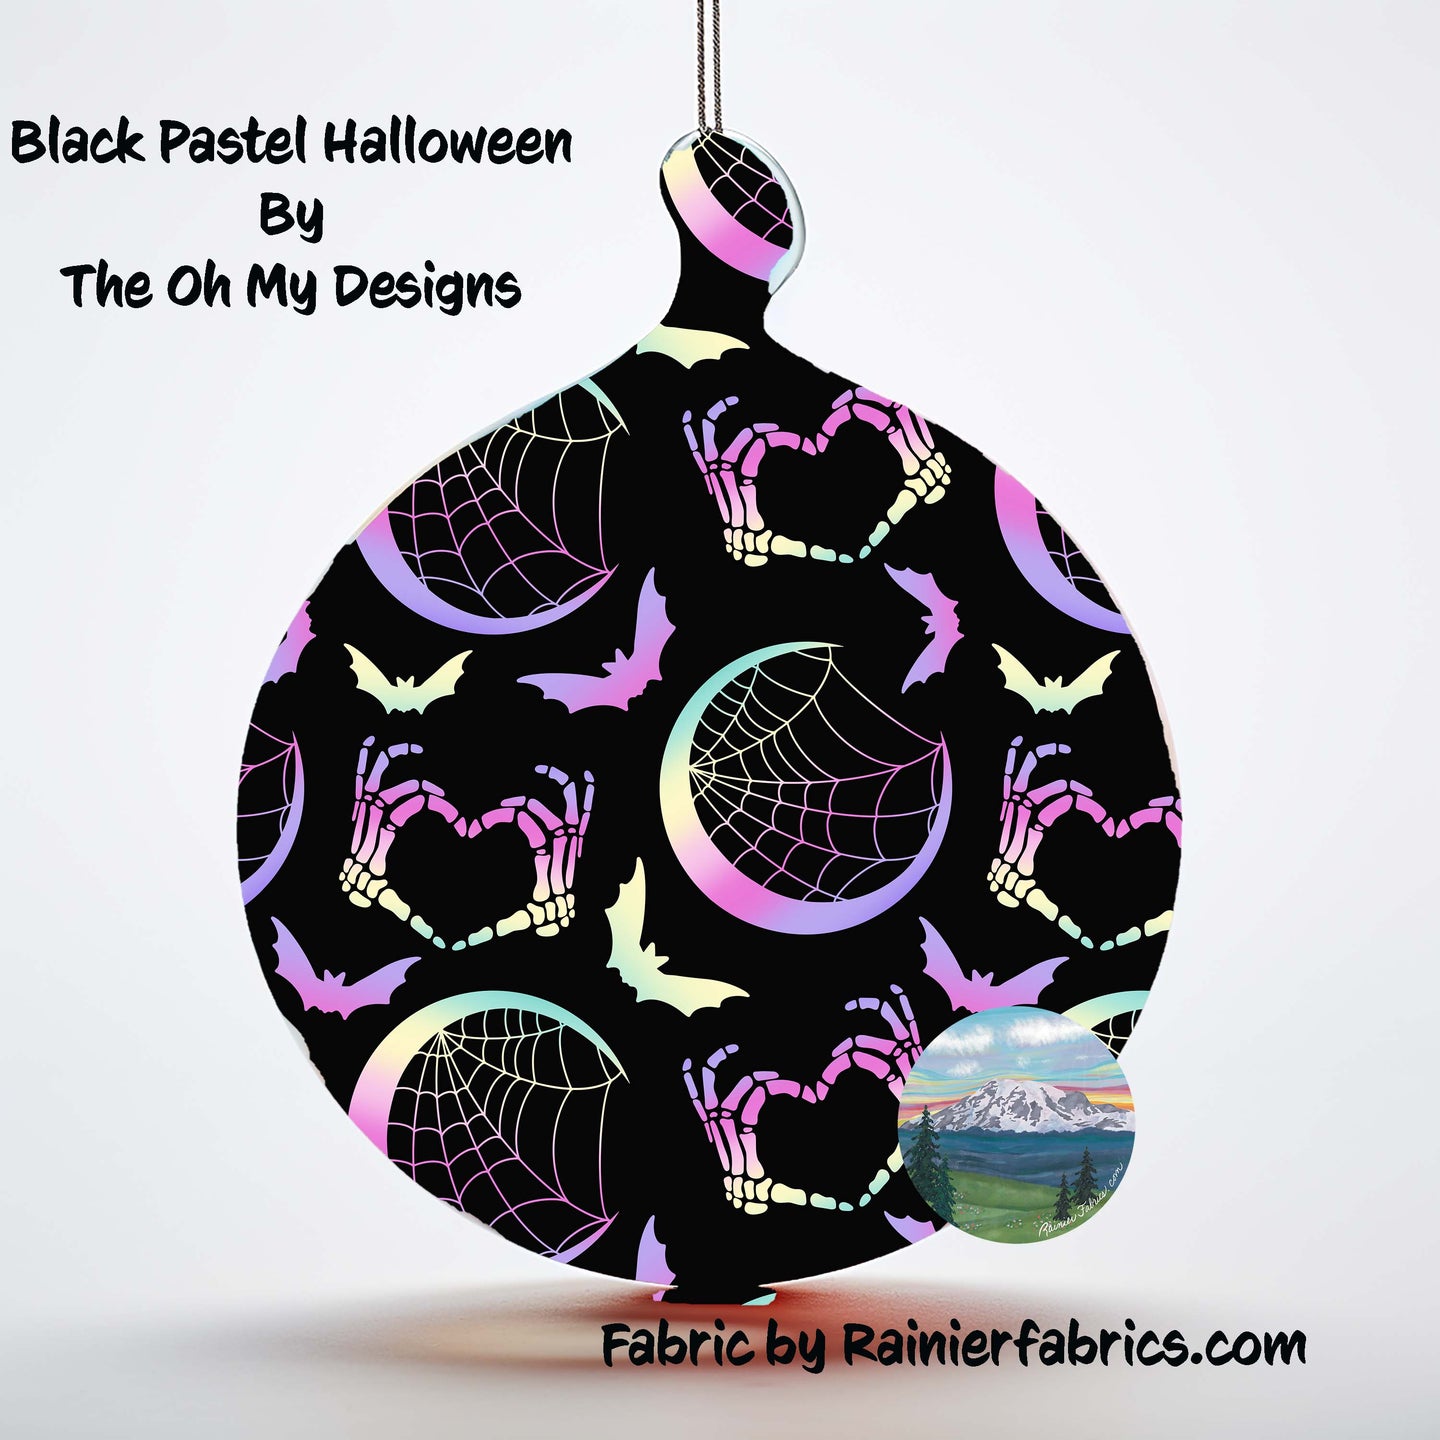 Black Pastel Halloween by The Oh My Designs